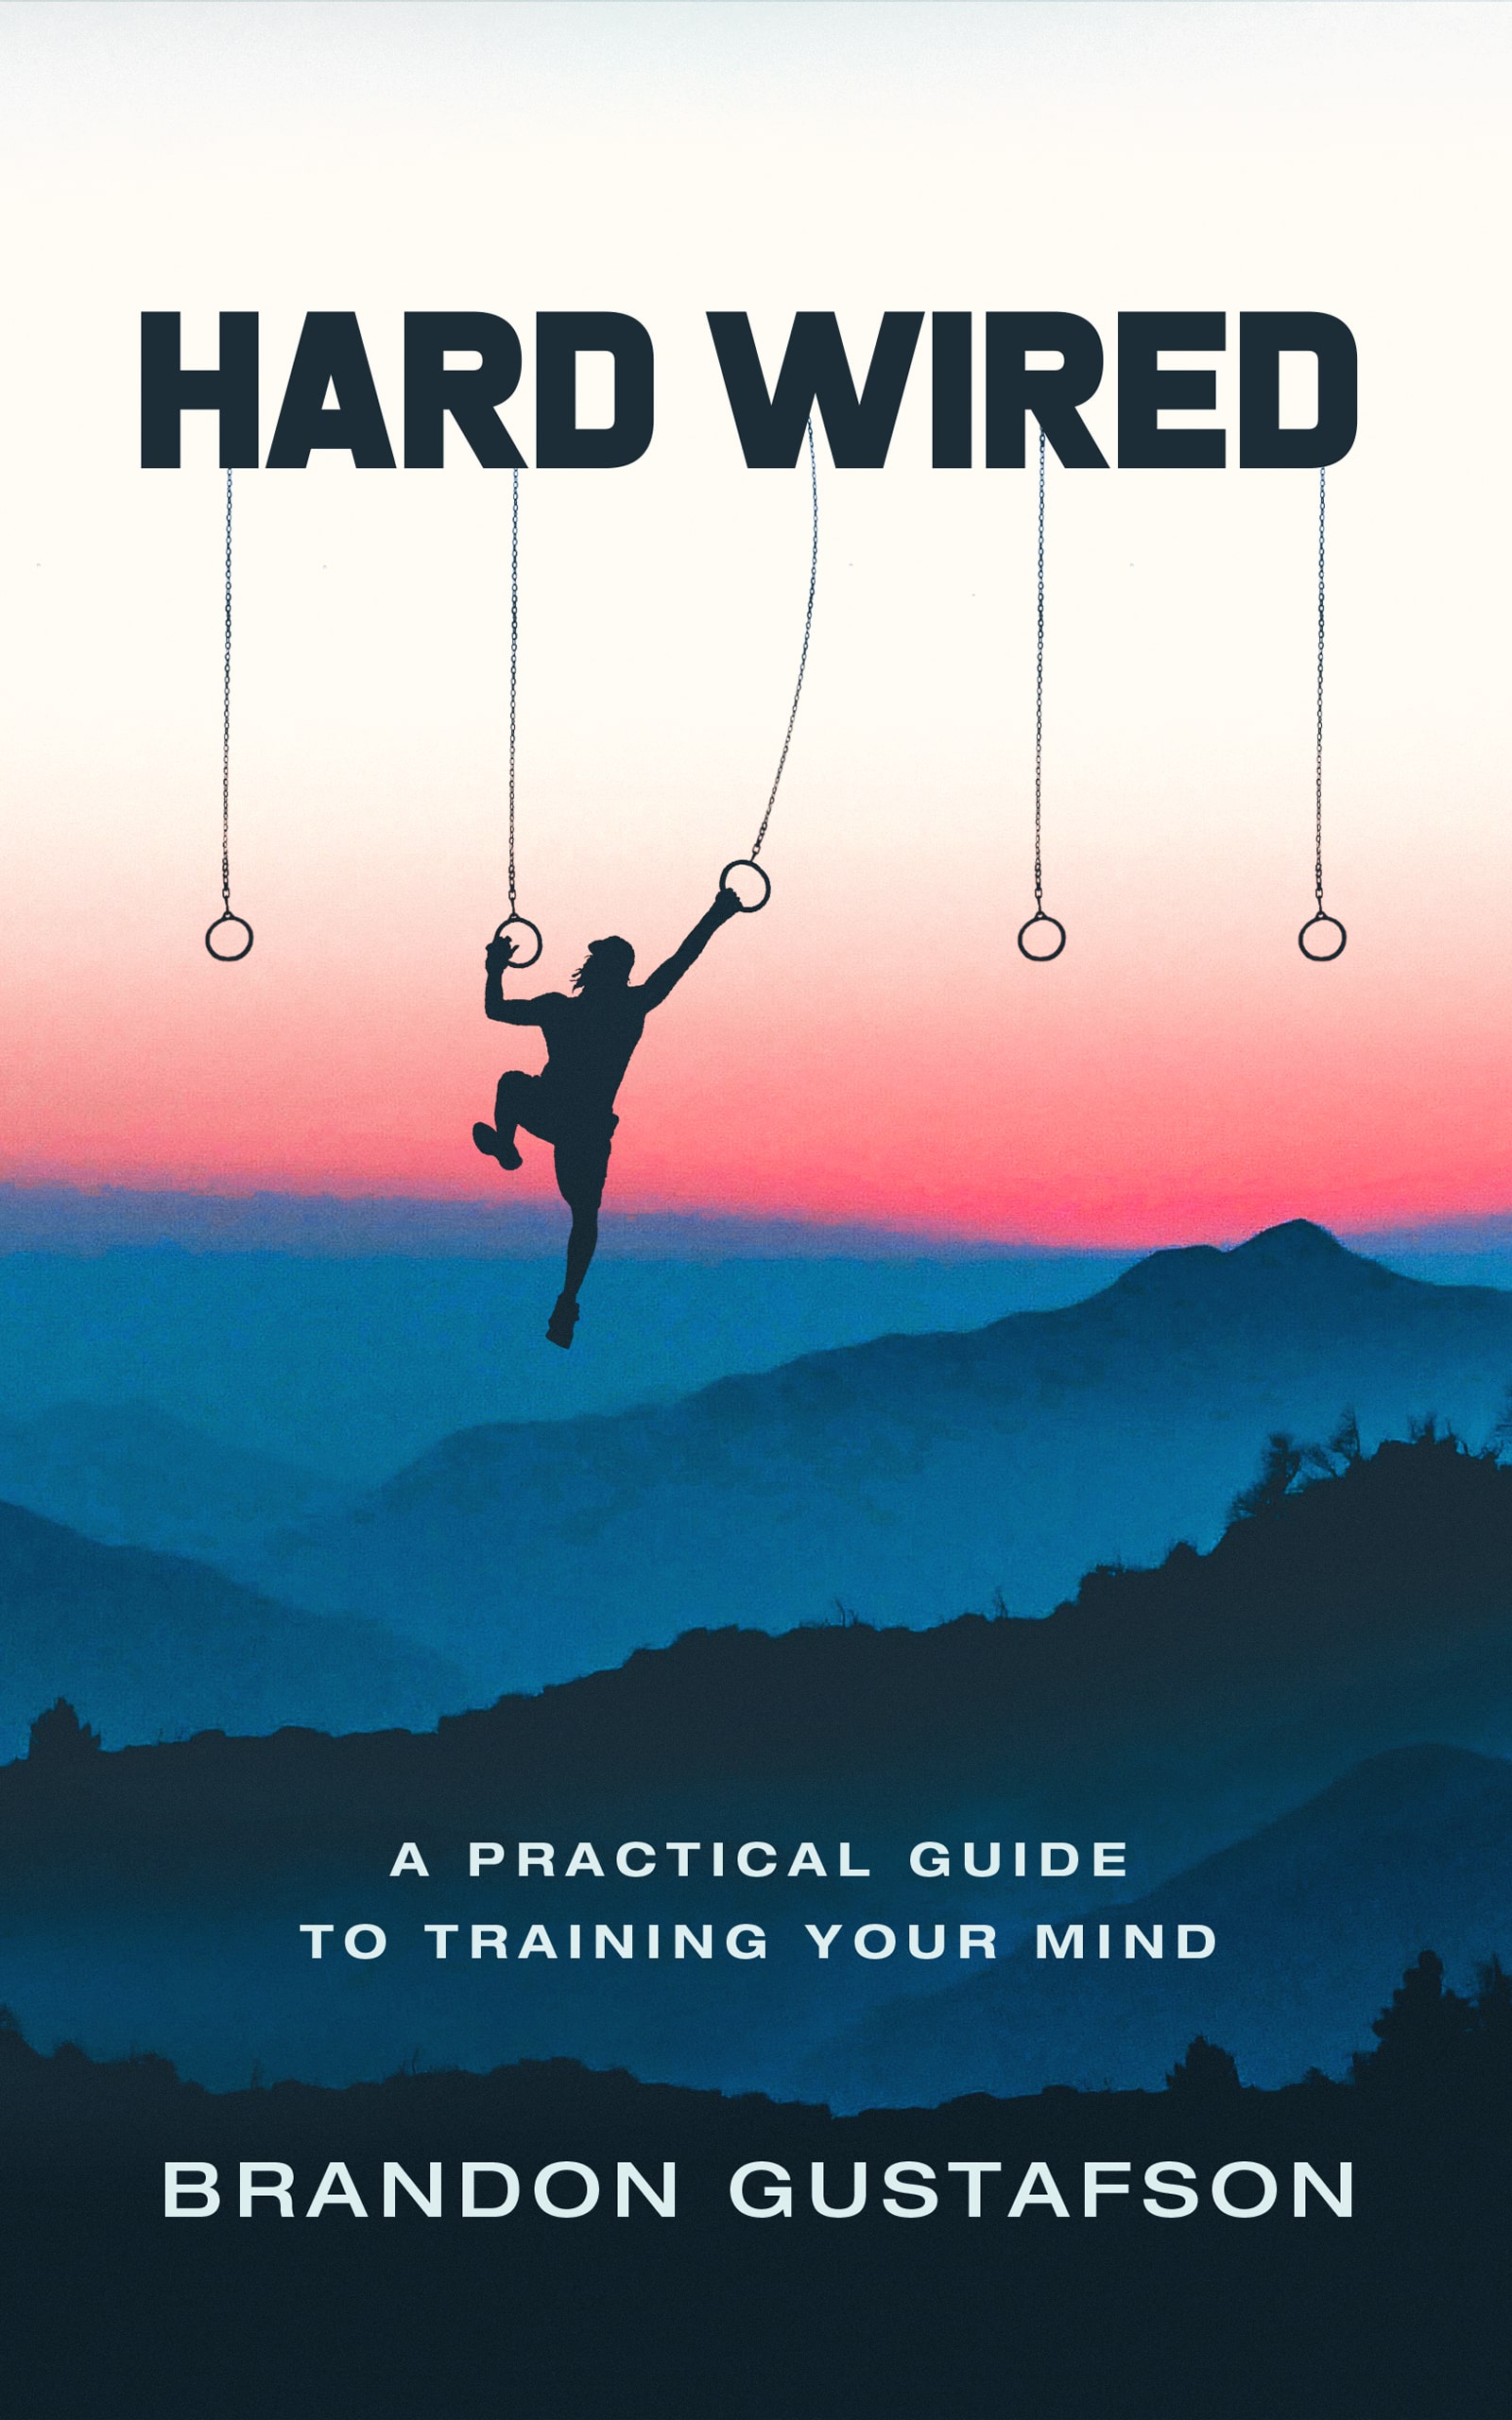 FREE: Hard Wired: A Practical Guide To Training Your Mind by Brandon Gustafson